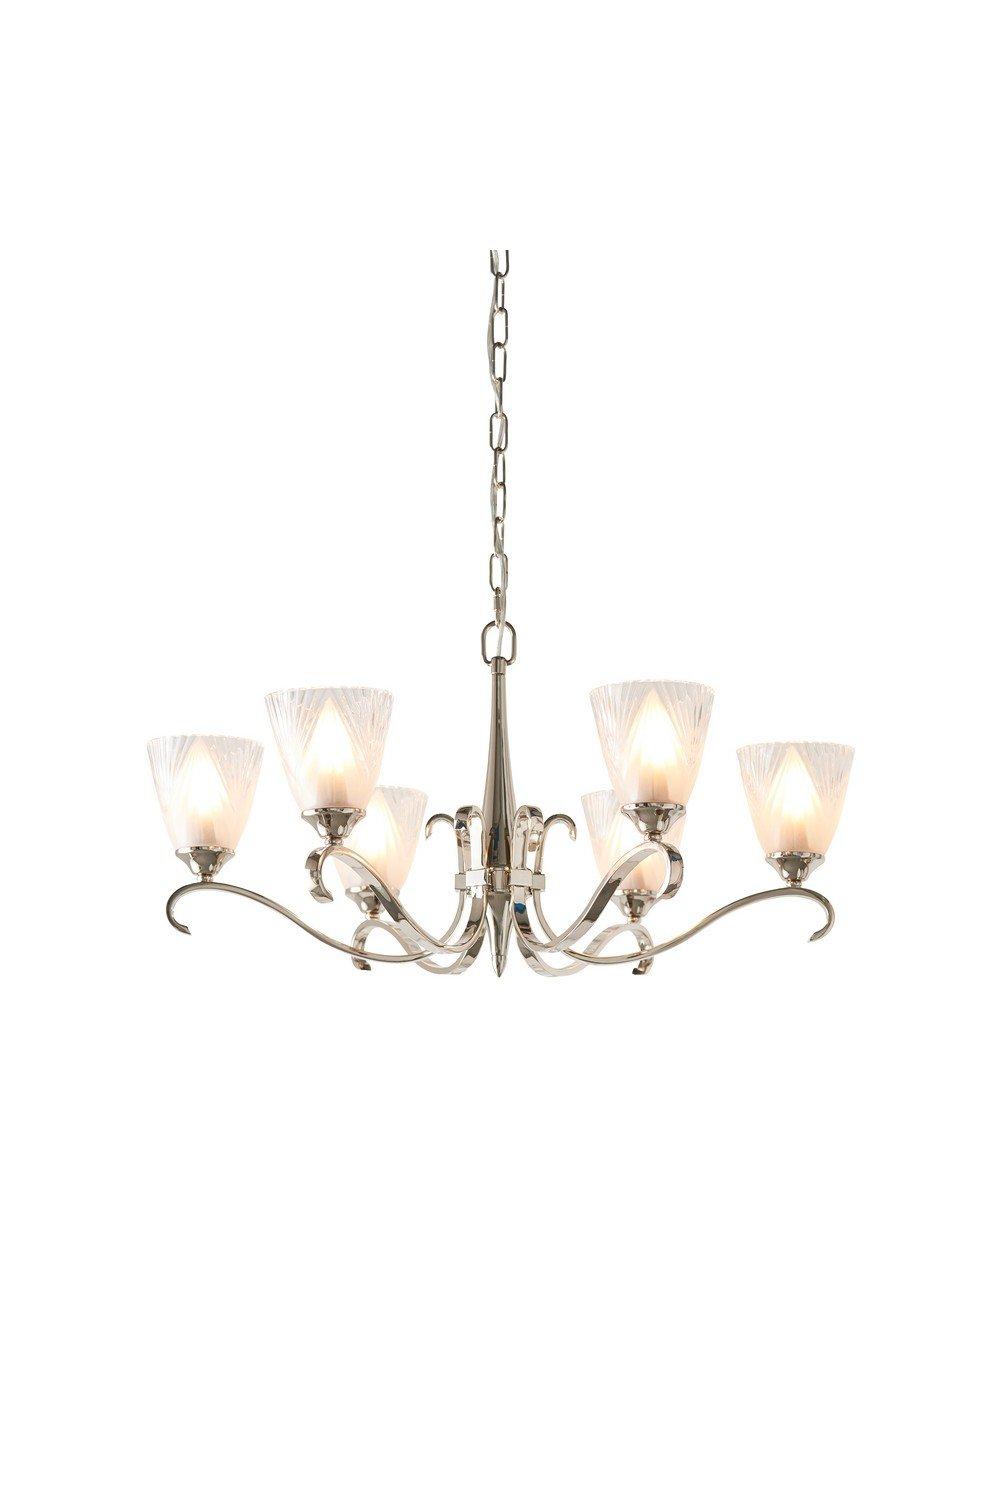 Columbia 6 Light Multi Arm Ceiling Chandelier Clear Glass Polished Nickel E14